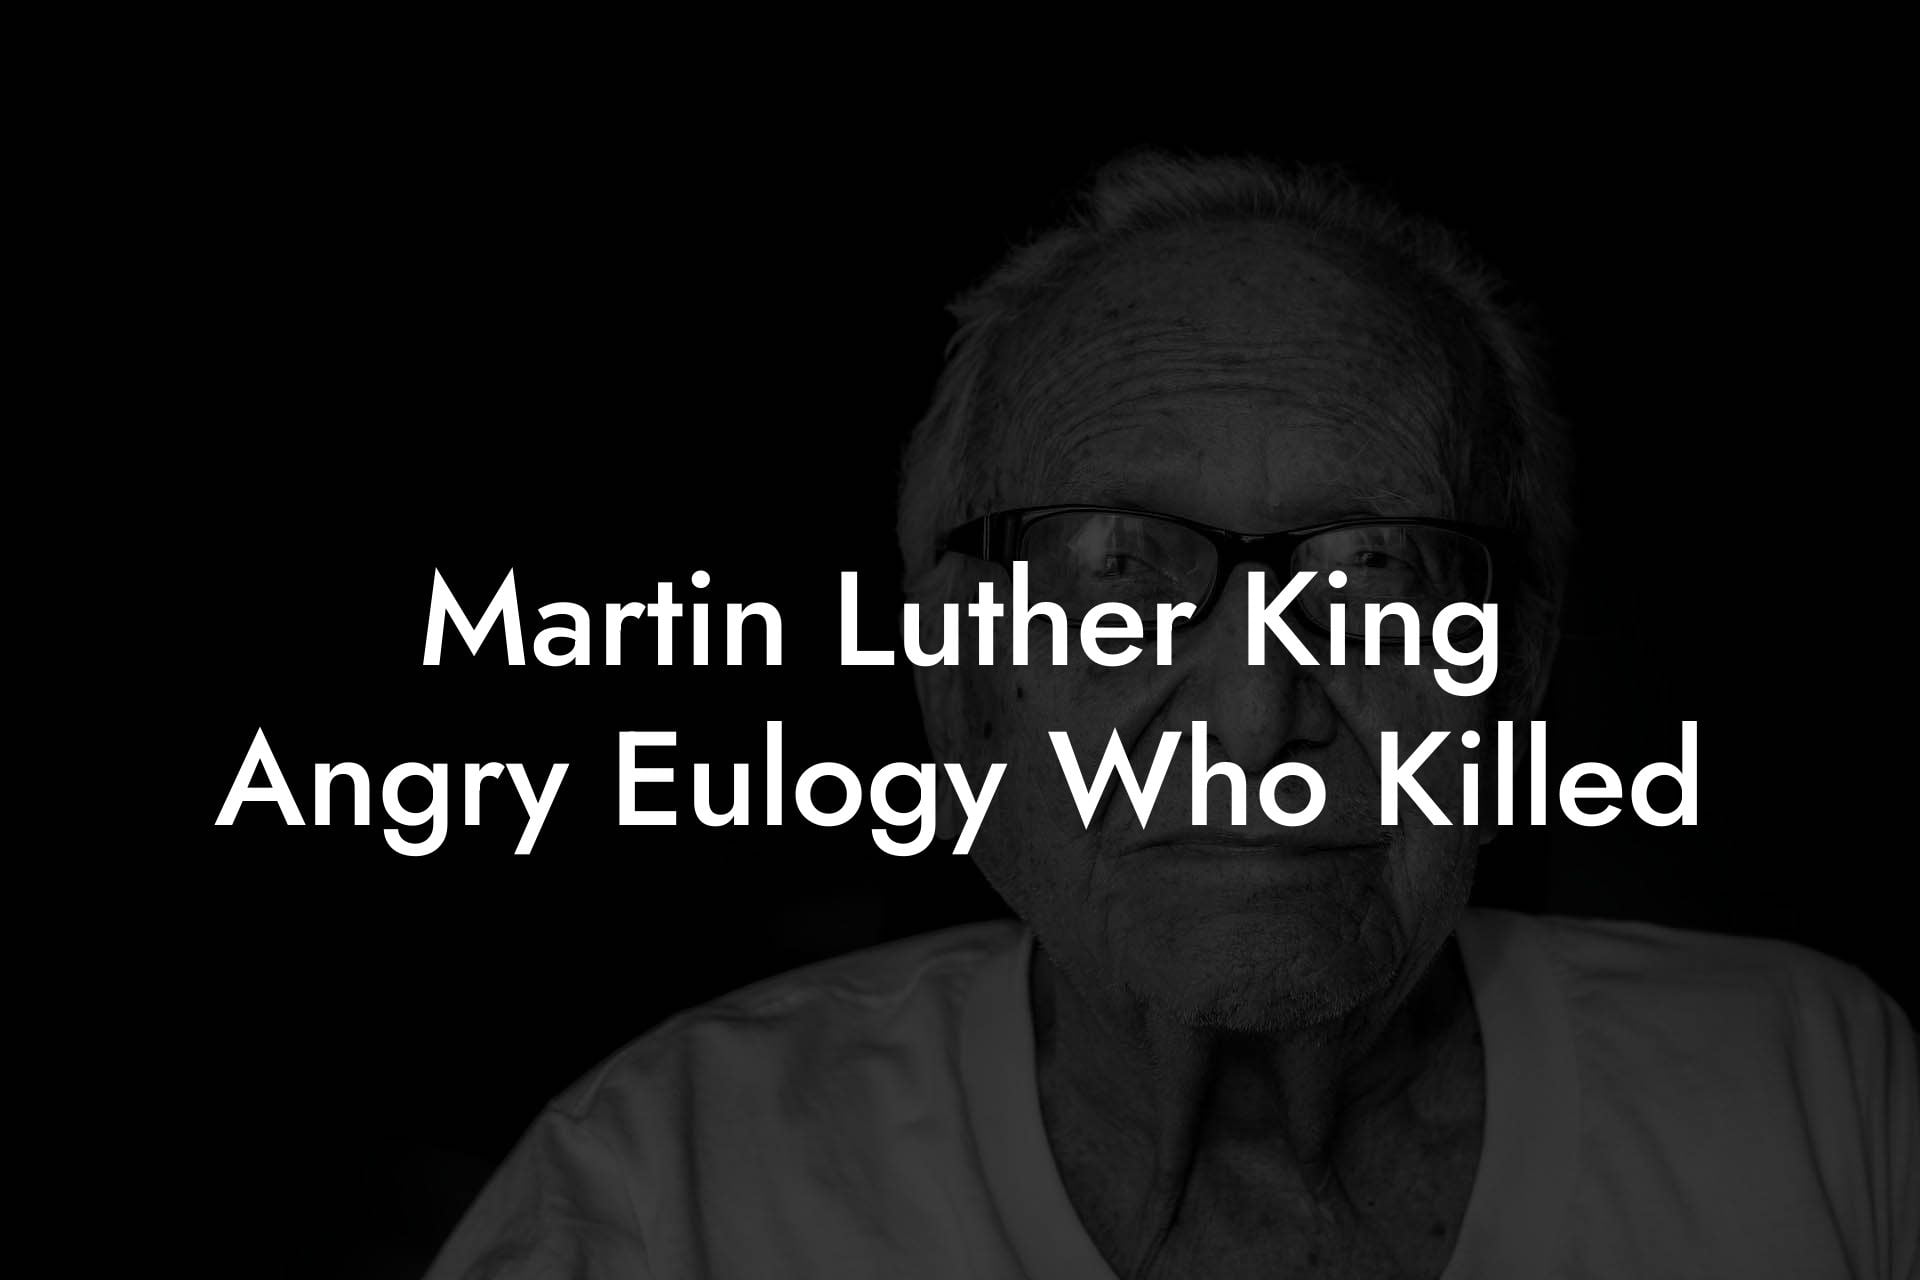 Martin Luther King Angry Eulogy Who Killed